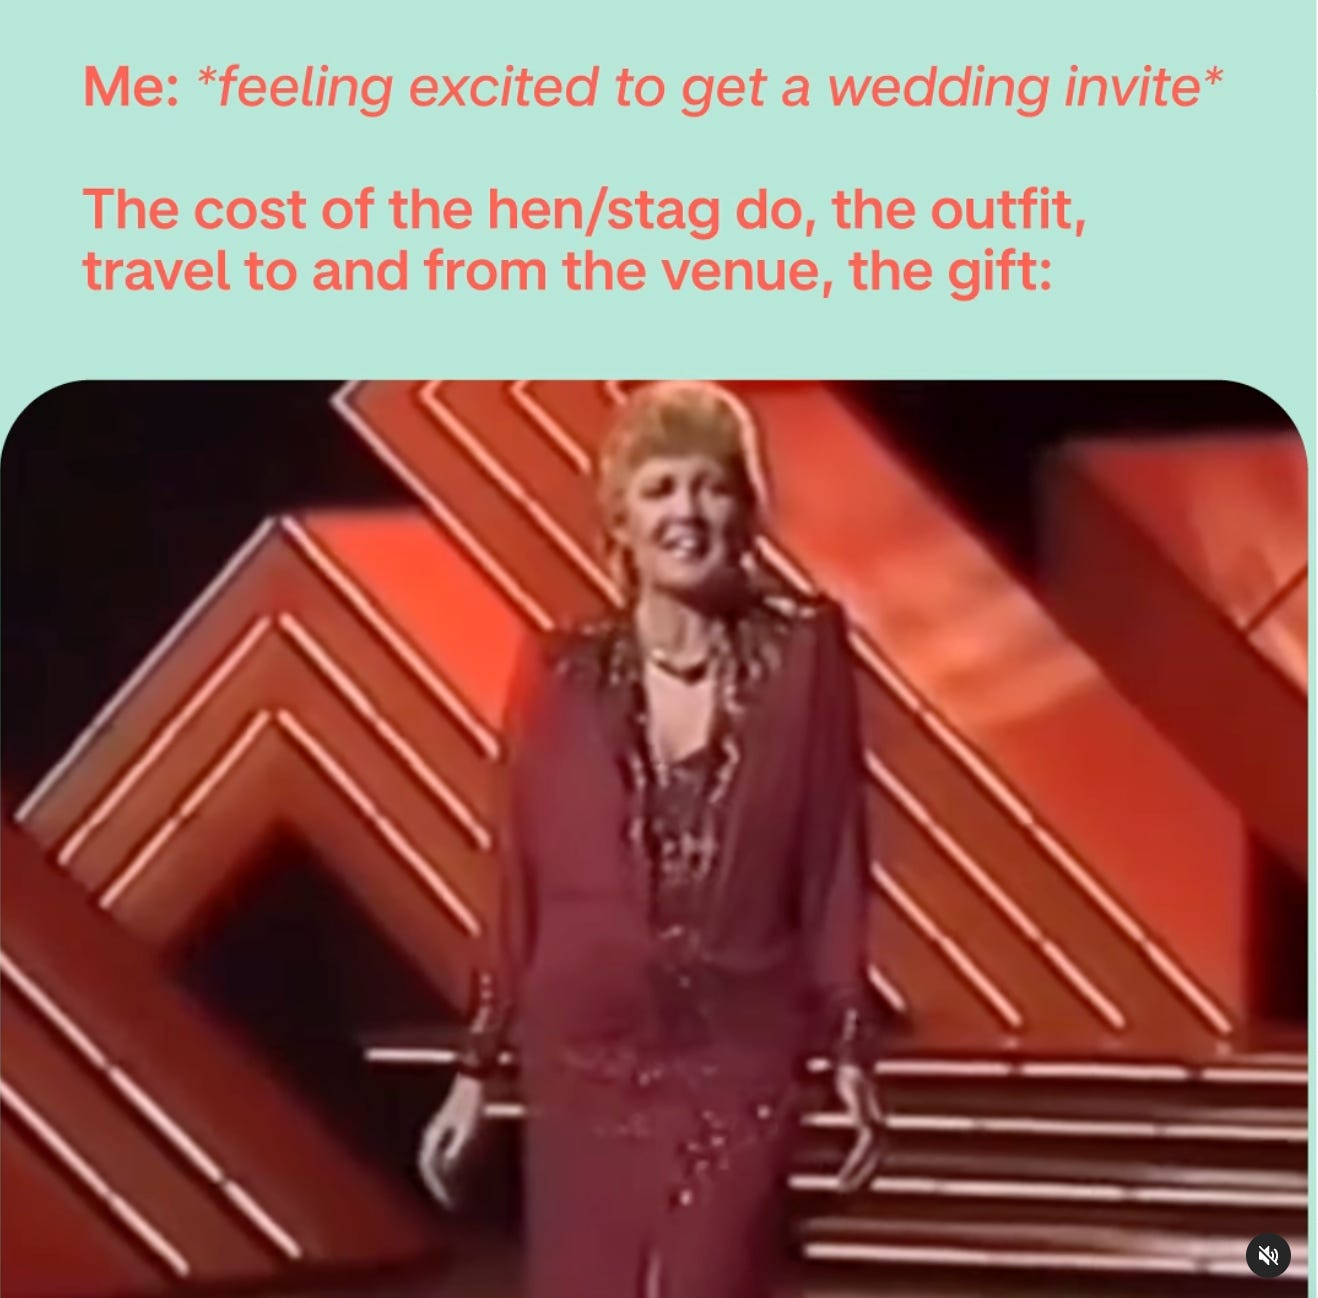 A meme with an image of a woman standing on a stage, smiling broadly, dressed in a vintage purple outfit. The text above reads: 'Me: feeling excited to get a wedding invite' and below the image: 'The cost of the hen/stag do, the outfit, travel to and from the venue, the gift:' The text implies a humorous contrast between the initial excitement of receiving a wedding invitation and the subsequent realization of the associated expenses